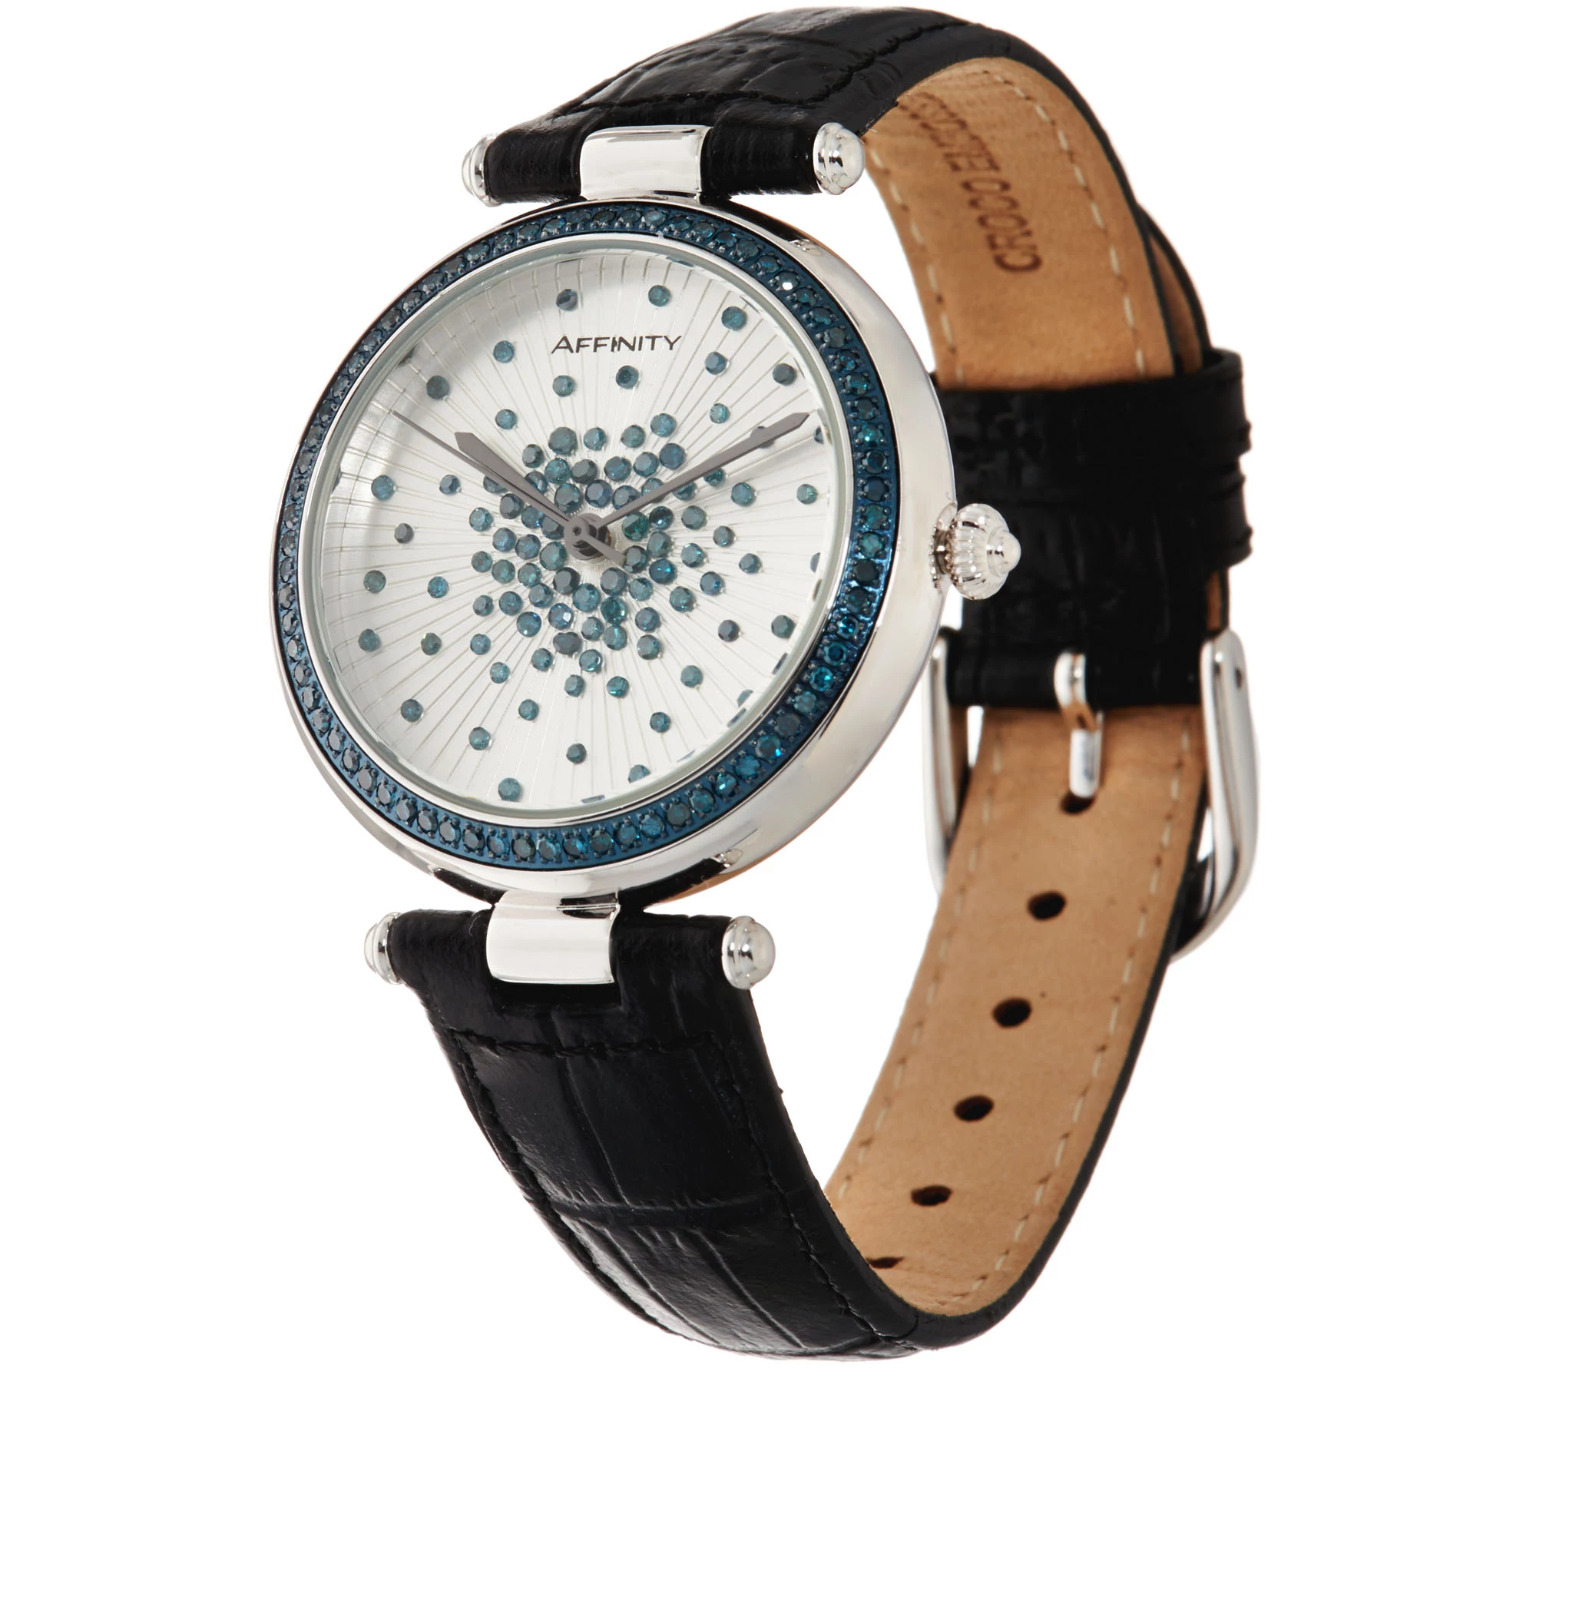 Blue Diamond Scattered Design Leather Strap Watch 6-1/4" to 8"